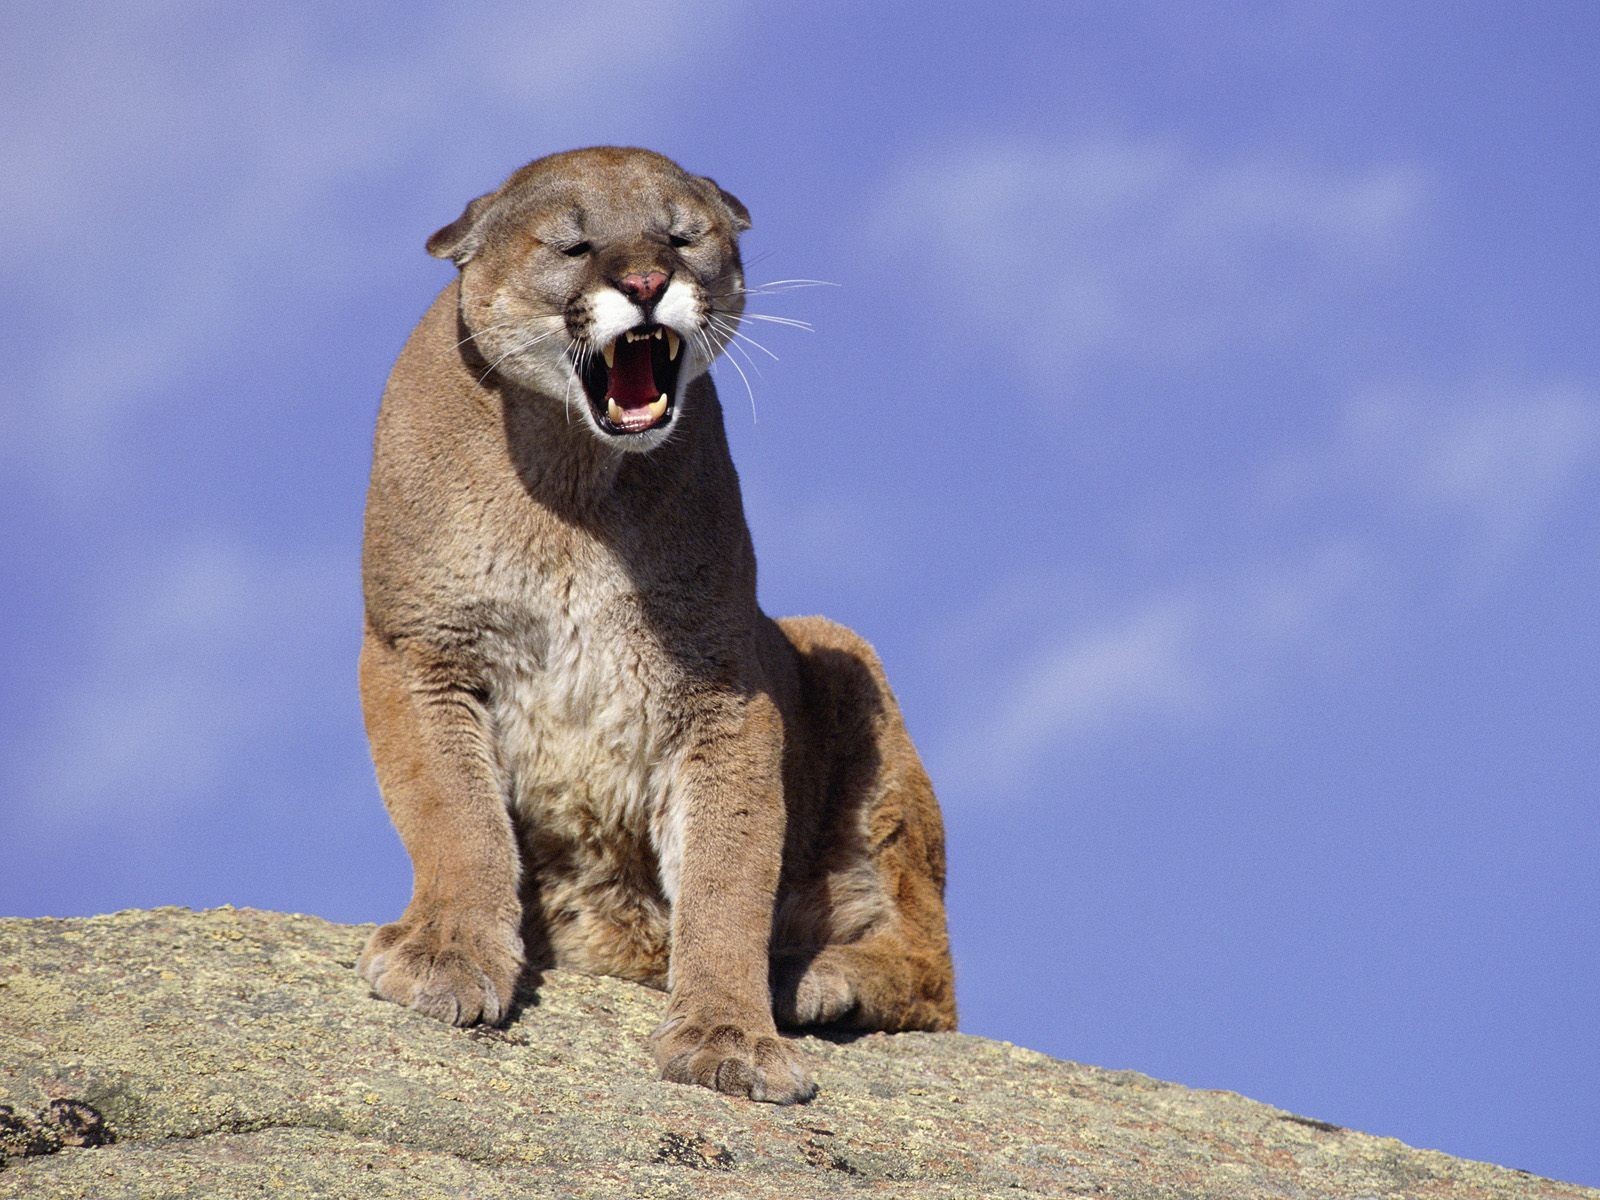 Cougar on stone